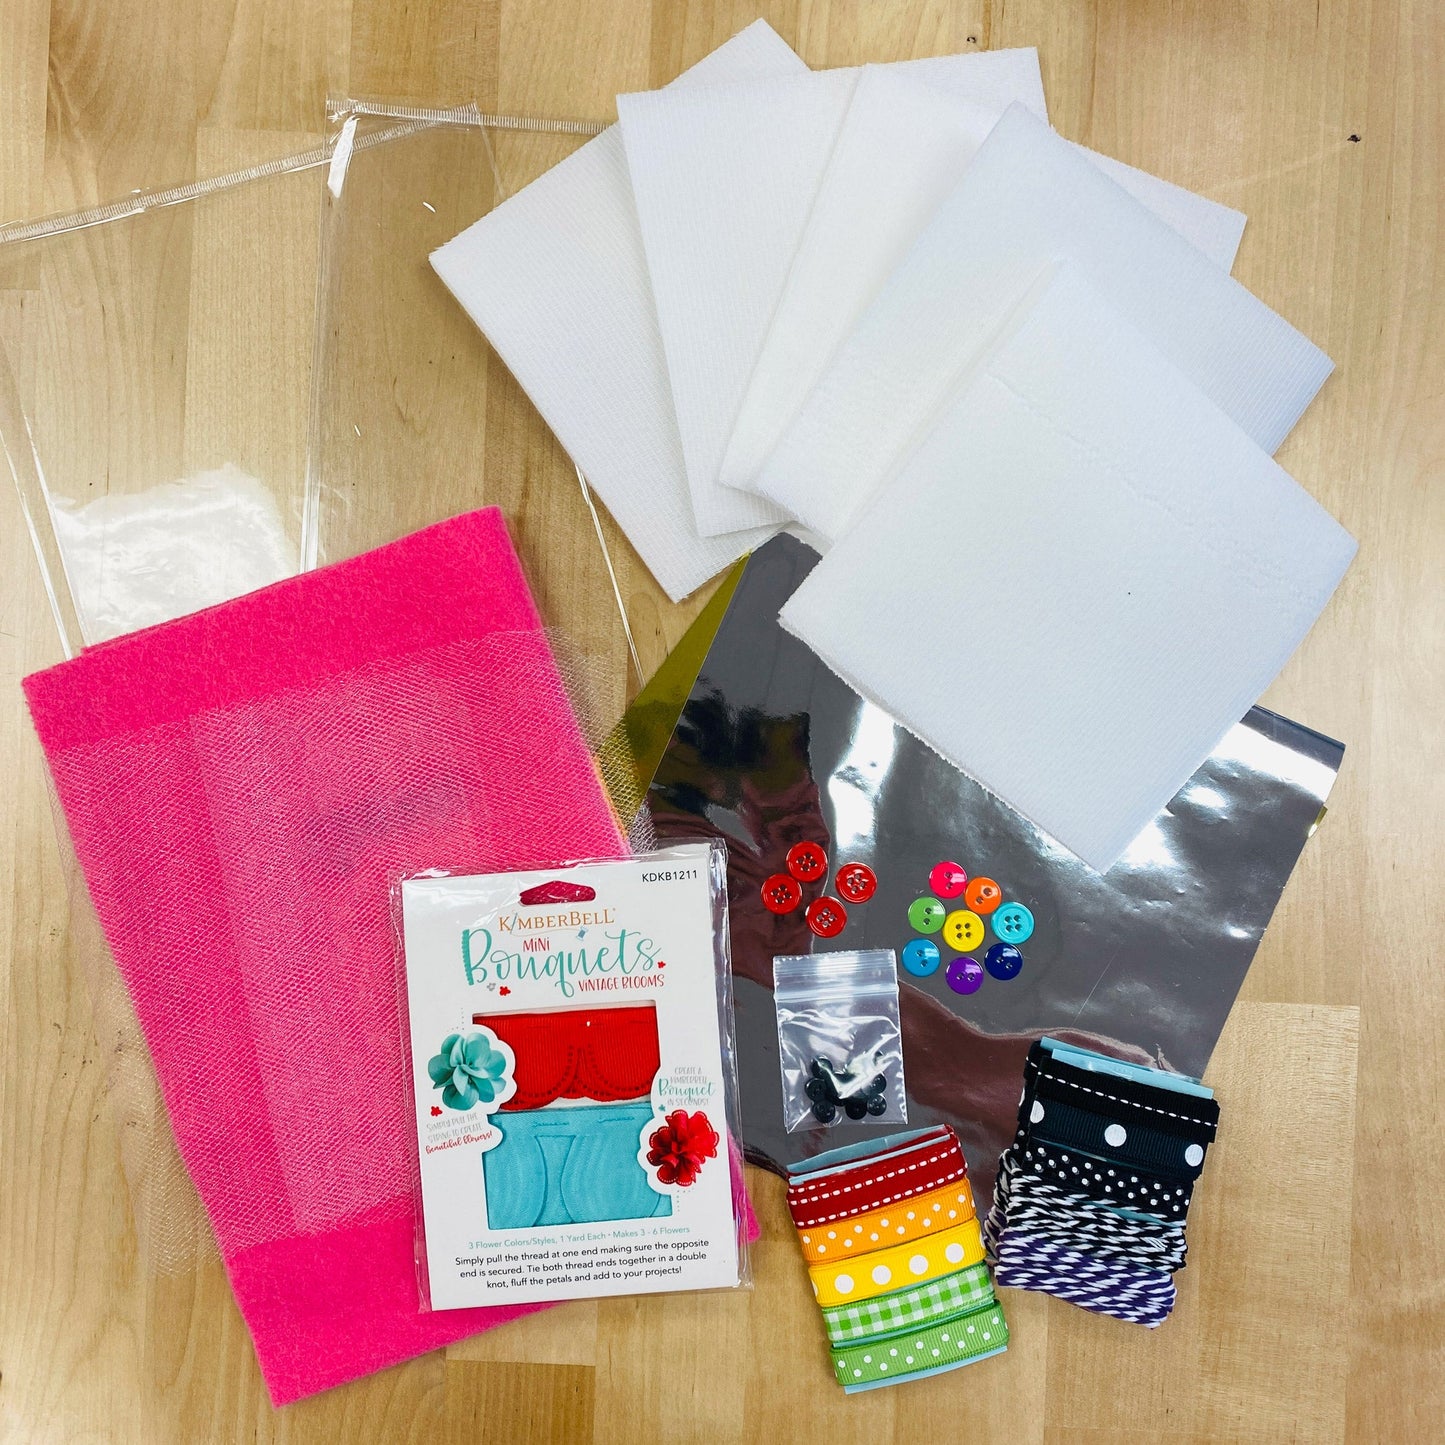 All of the fun details needed to complete the Hello Sunshine feature quilt by Kimberbell. The Embellishment Kit includes vinyl, flexi foam, tulle, felt, mylar, pull flowers, buttons, ribbon, and twine.